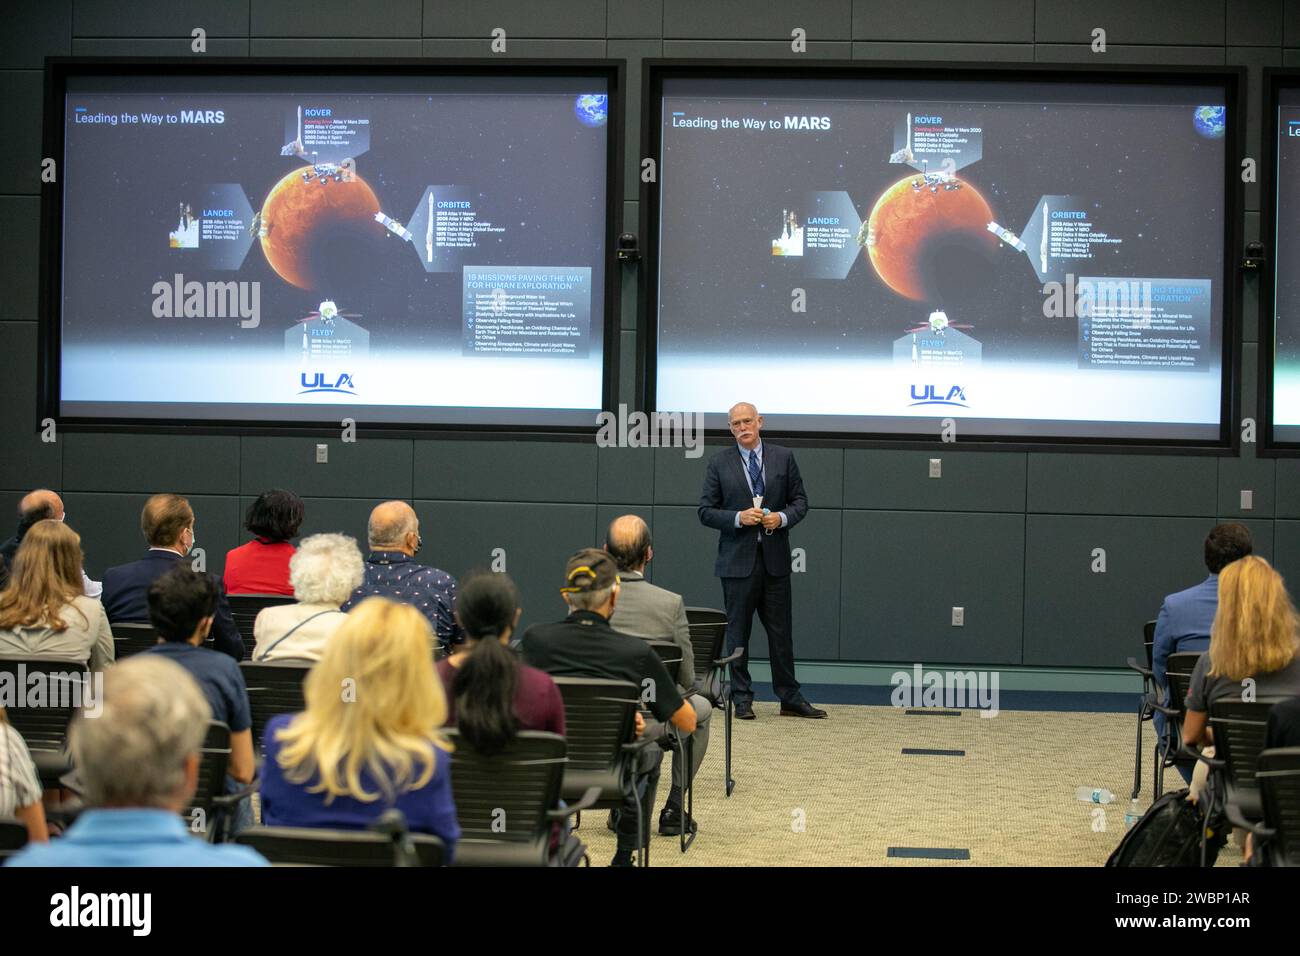 Tory Bruno, president and CEO of United Launch Alliance, participates in a Mars 2020 VIP briefing at the Operations and Support Building II at NASA’s Kennedy Space Center in Florida on July 30, 2020, before launch of the Mars Perseverance rover and Ingenuity helicopter on a United Launch Alliance Atlas V 541 rocket from Space Launch Complex 41 at nearby Cape Canaveral Air Force Station. Liftoff occurred at 7:50 a.m. The rover is part of NASA’s Mars Exploration Program, a long-term effort of robotic exploration of the Red Planet. The rover will search for habitable conditions in the ancient pas Stock Photo